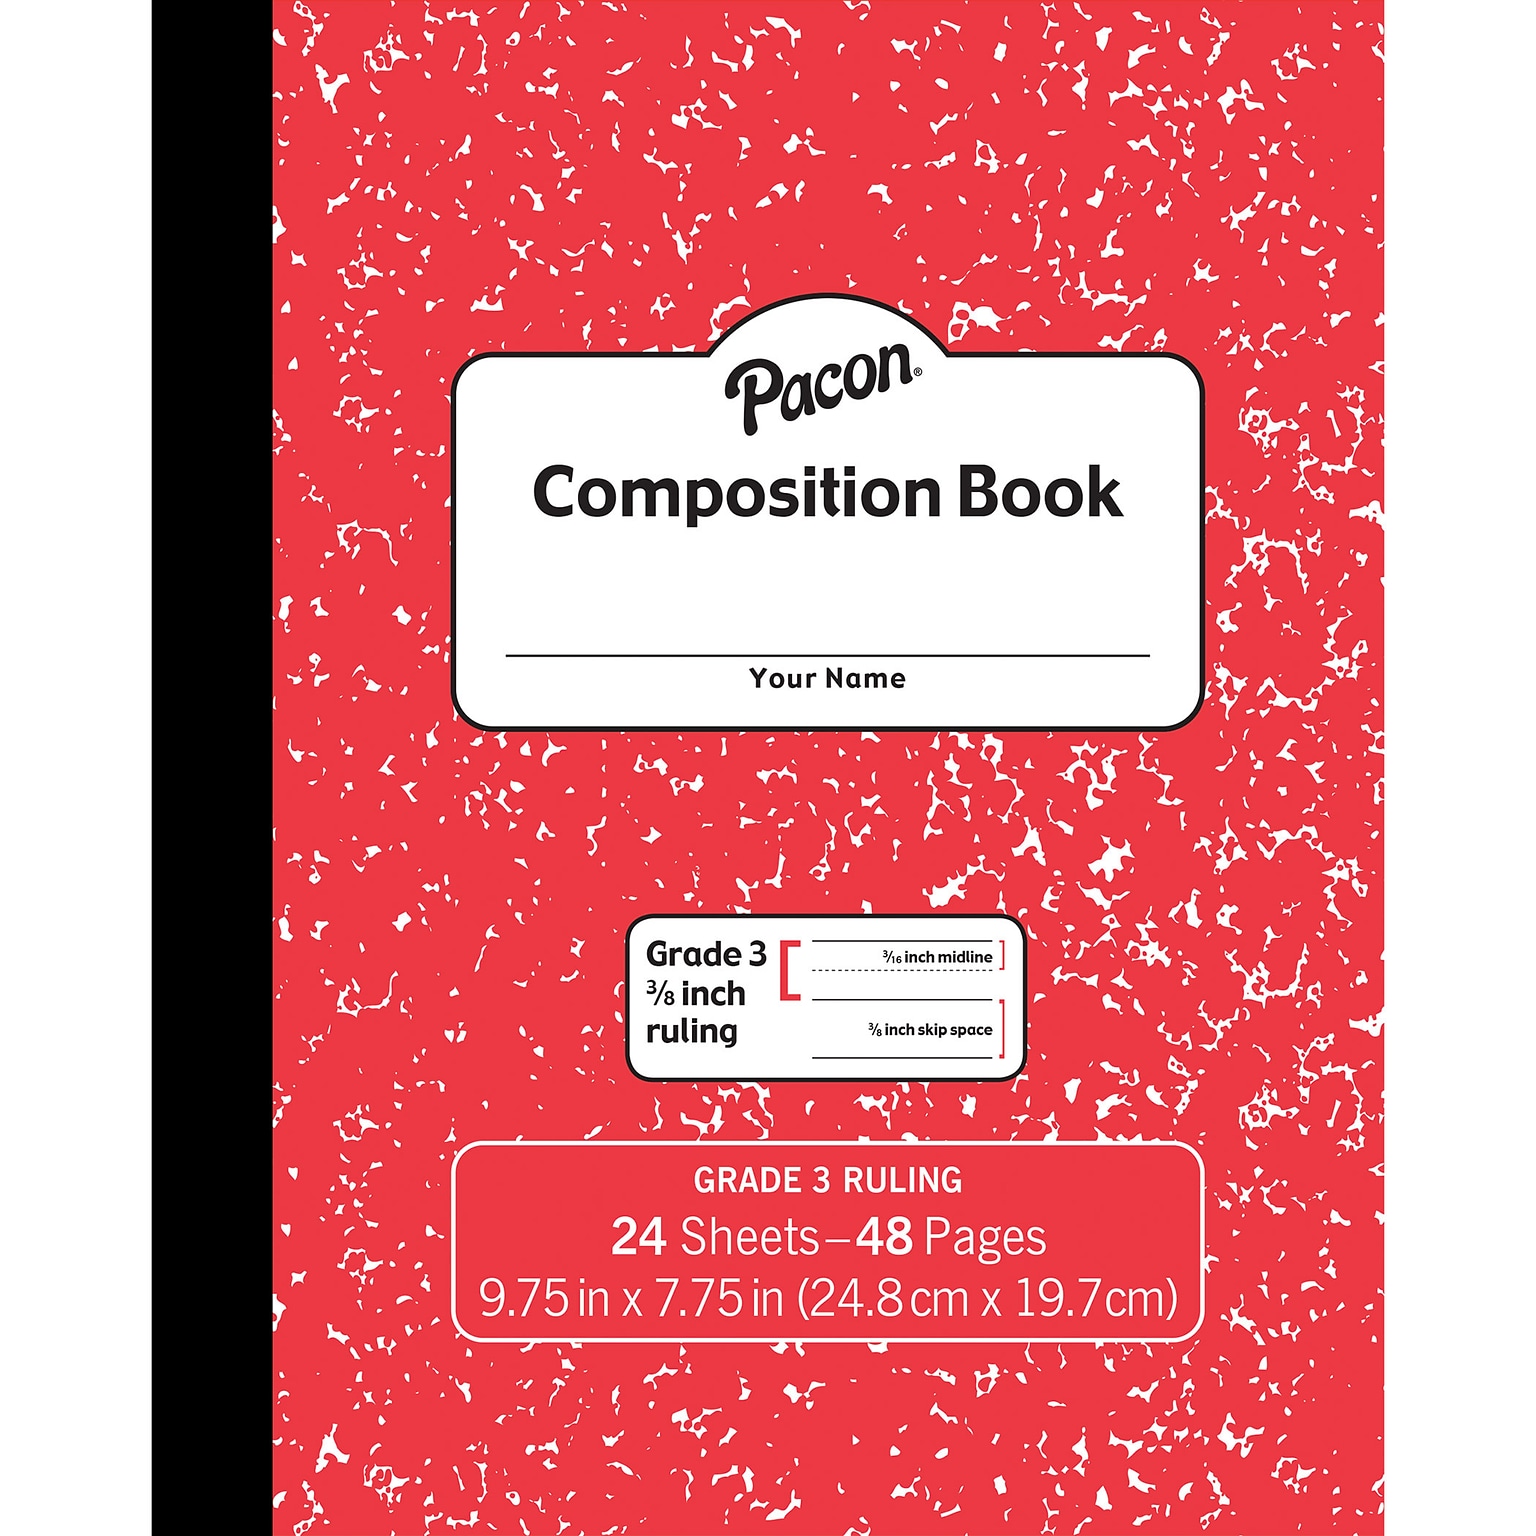 Pacon 1-Subject Composition Notebooks, 7.5 x 9.75, Manuscript Ruled, 24 Sheets, Red Marble, Each (PACMMK37139)